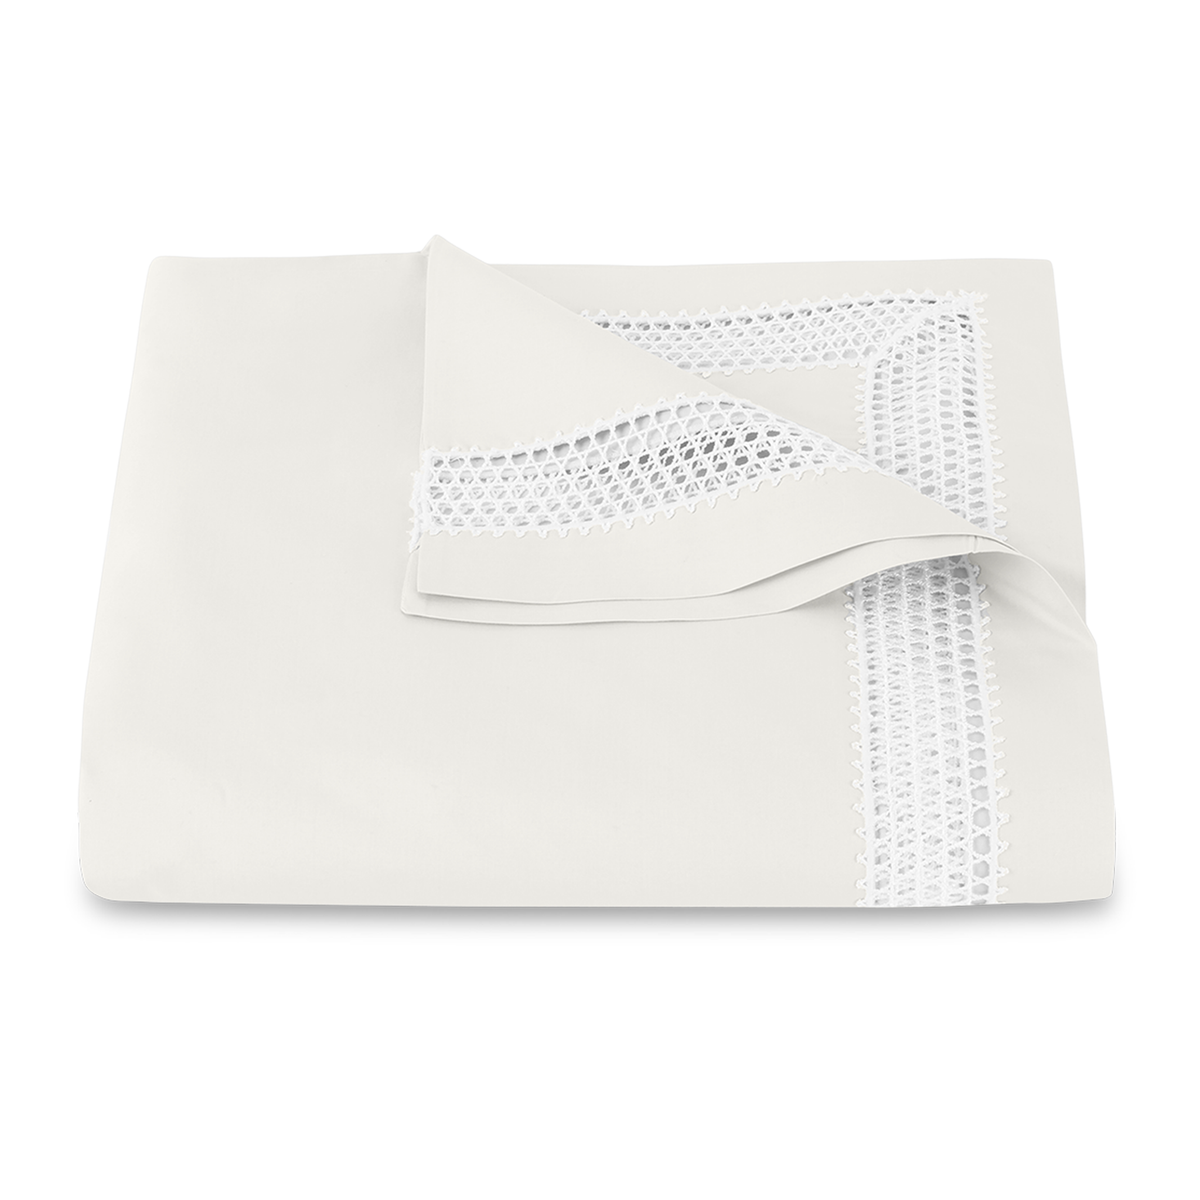 Clear Image of Matouk Cecily Duvet Cover in Bone Color